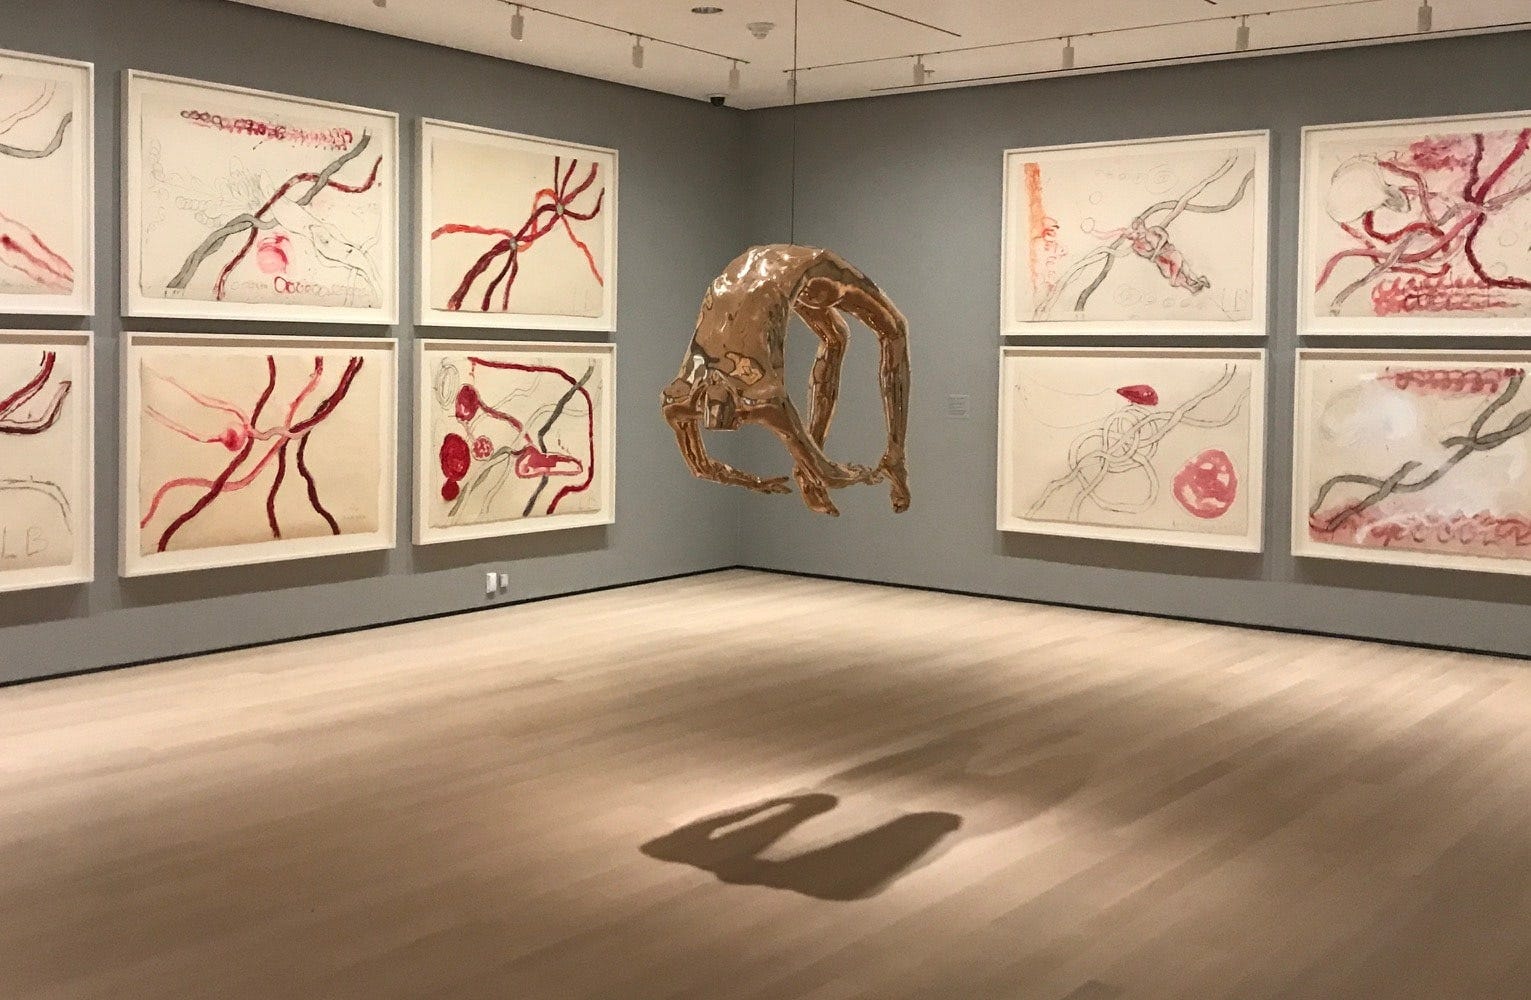 Crawling through Louise Bourgeois’s Creative Process at MoMA